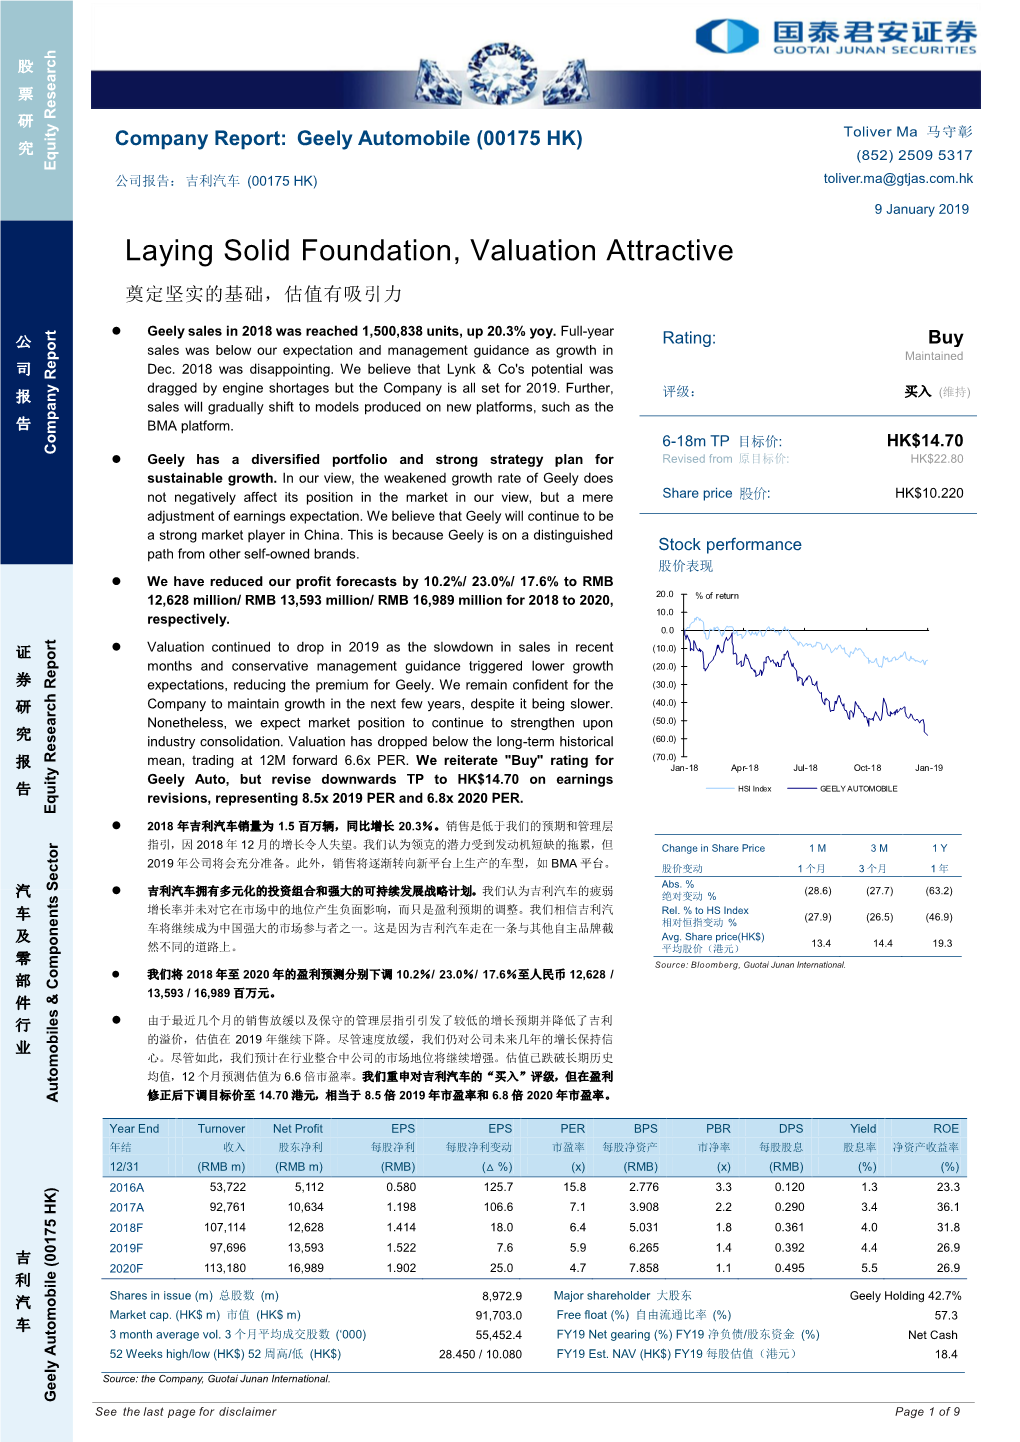 Laying Solid Foundation, Valuation Attractive 奠定坚实的基础，估值有吸引力